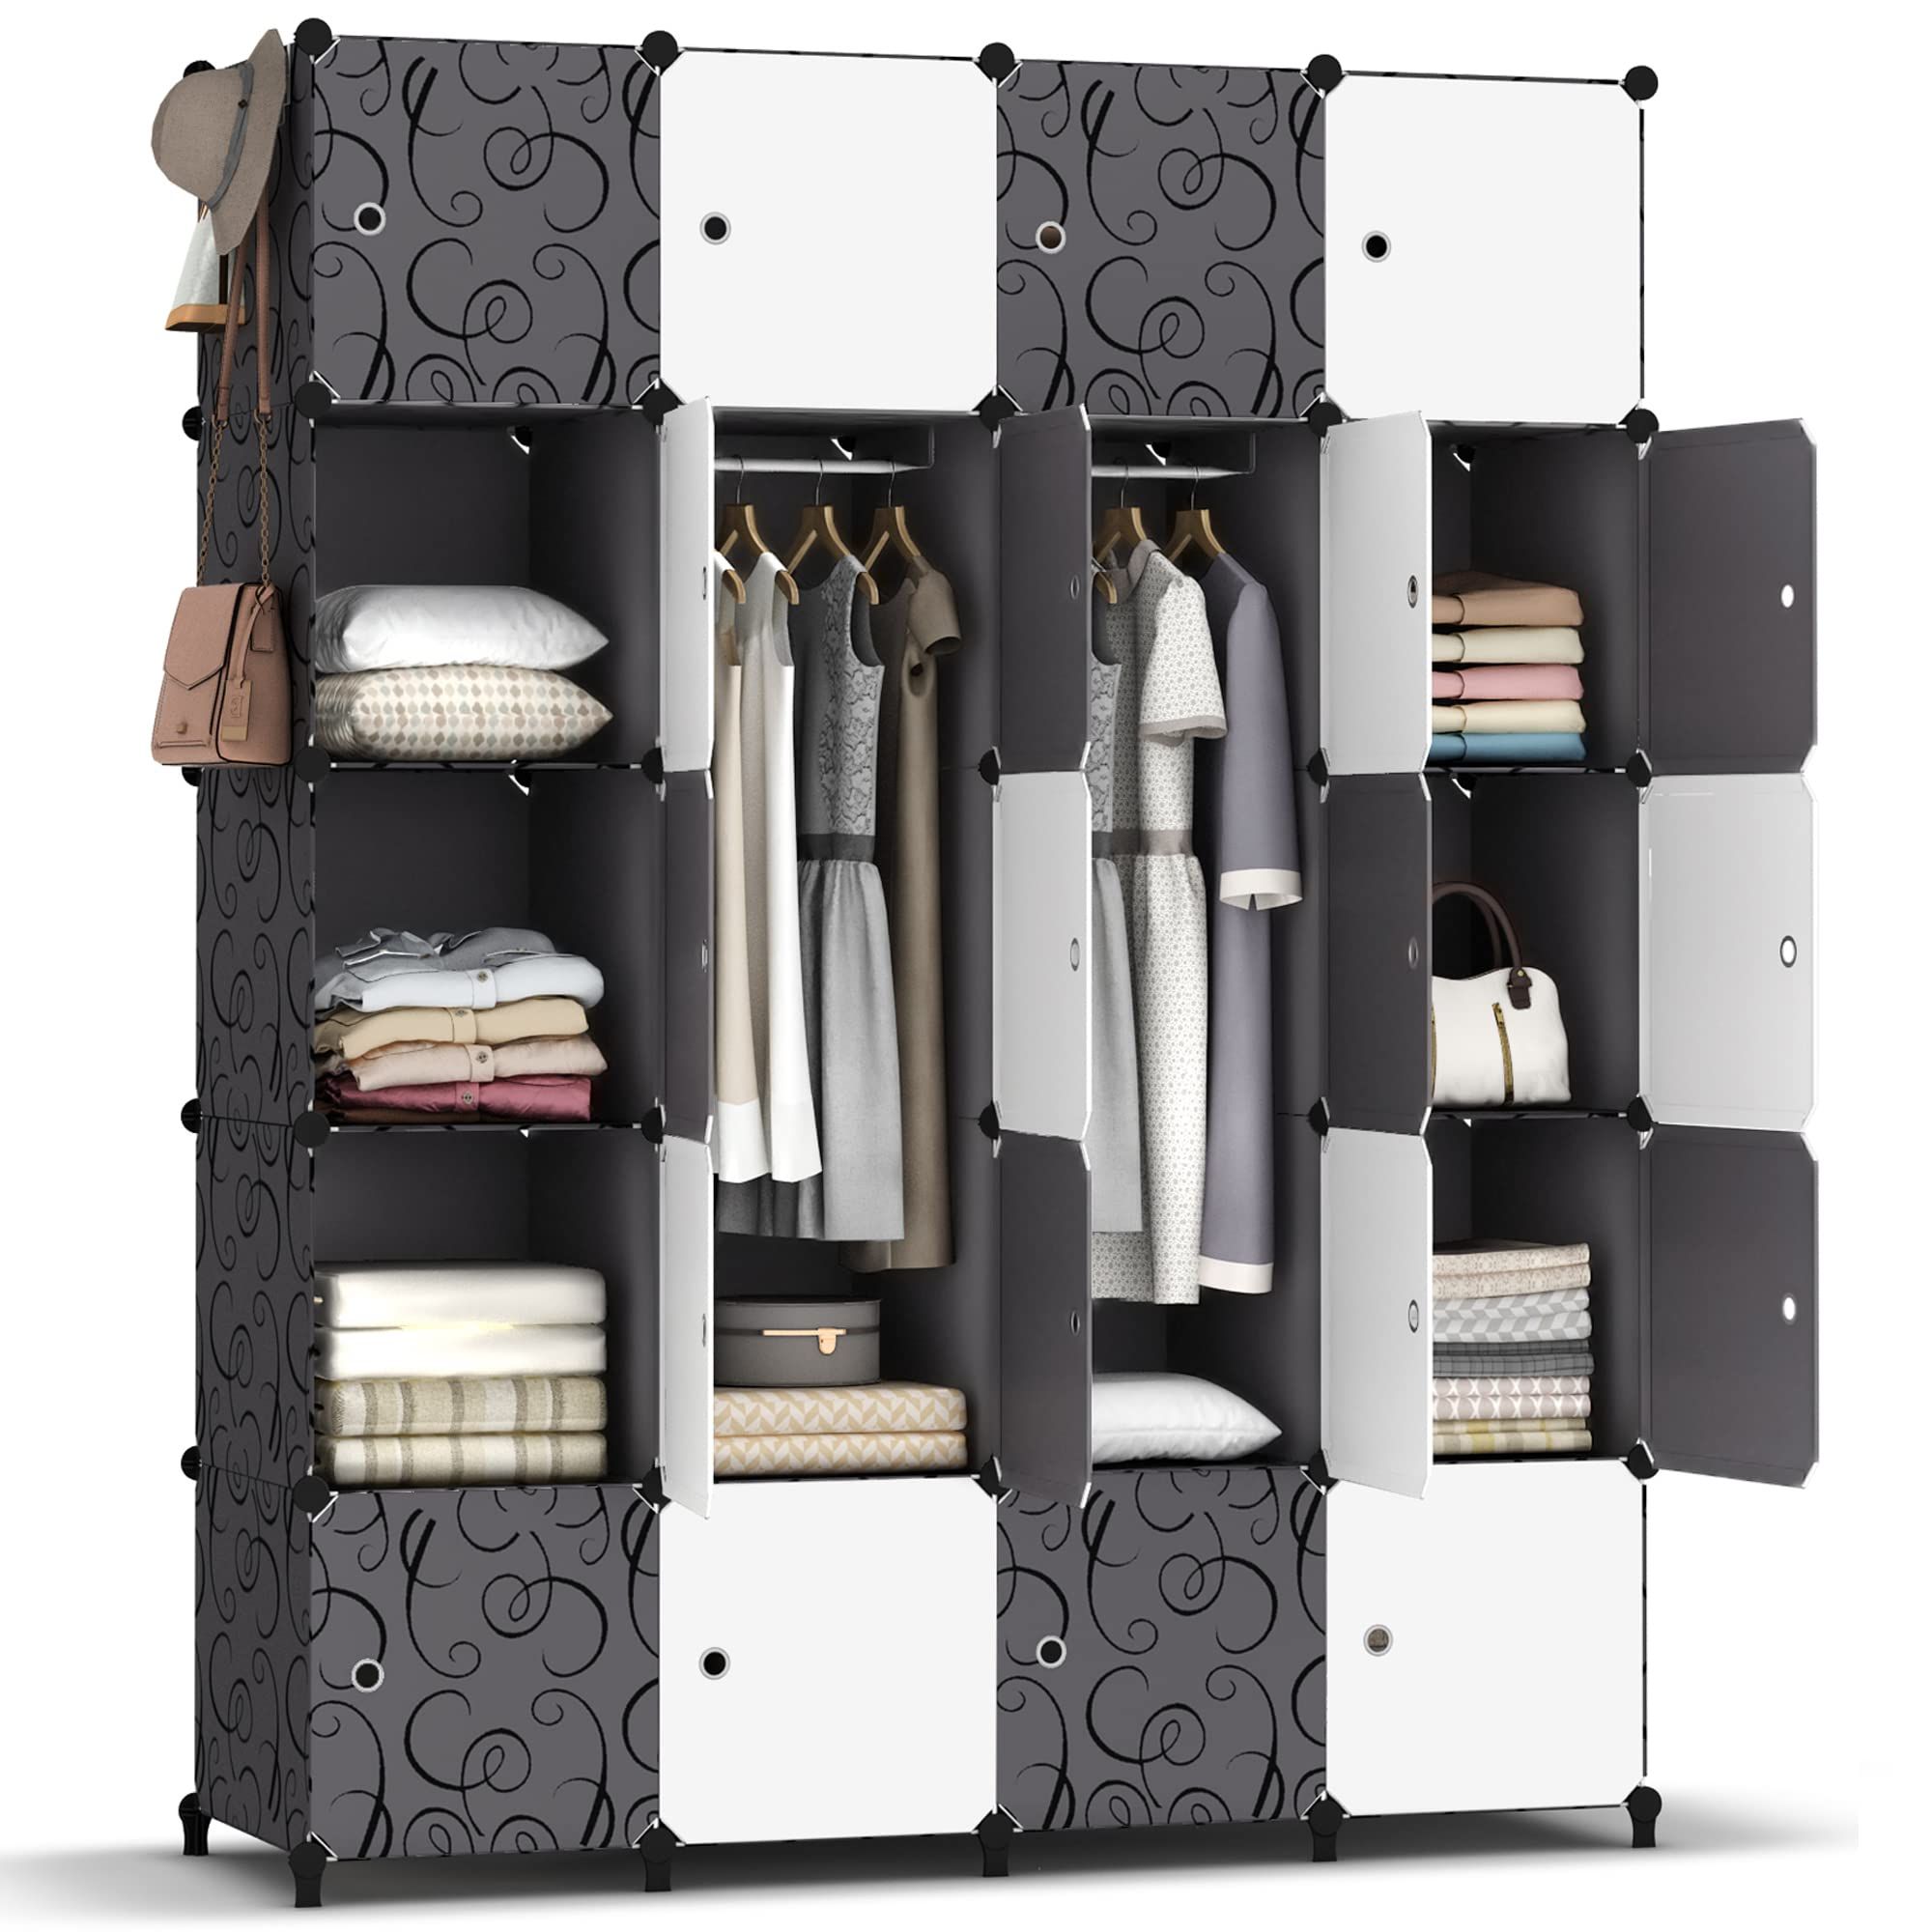 Homidec Portable Wardrobe 20 Cube Closet With 3 Clothes Hanging Rails,  14"x18" Deeper Cube Combination Armoire Modular Cabinet Storage Organizer  For Bedroom Clothes Shoes Toys, Black & White : Amazon.co (View 8 of 10)